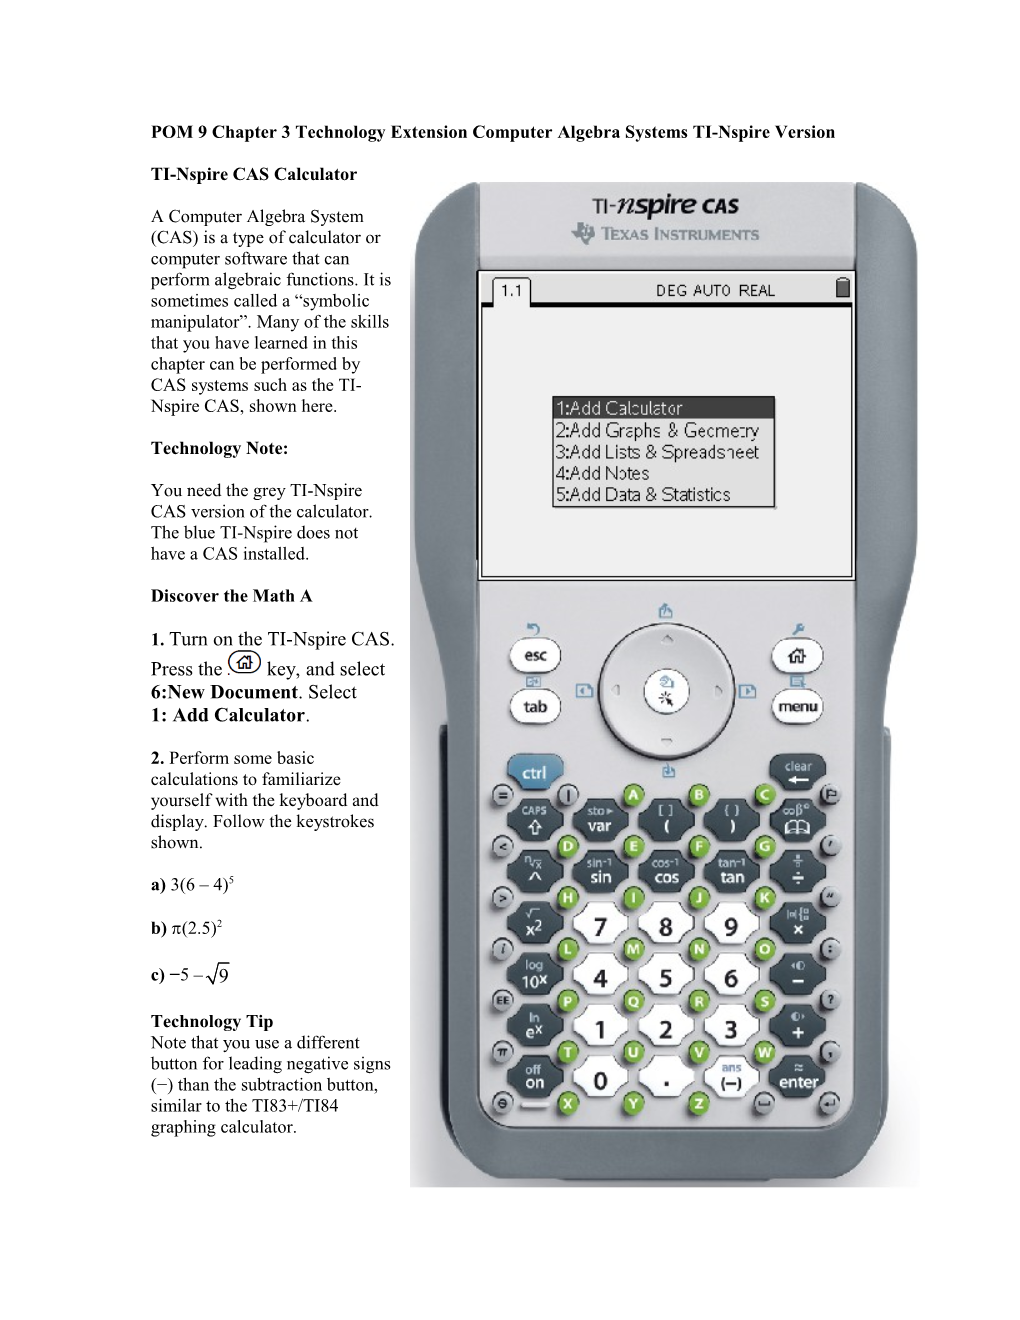 POM9 Chapter 3 Technology Extension Computer Algebra Systems TI-Nspire Version